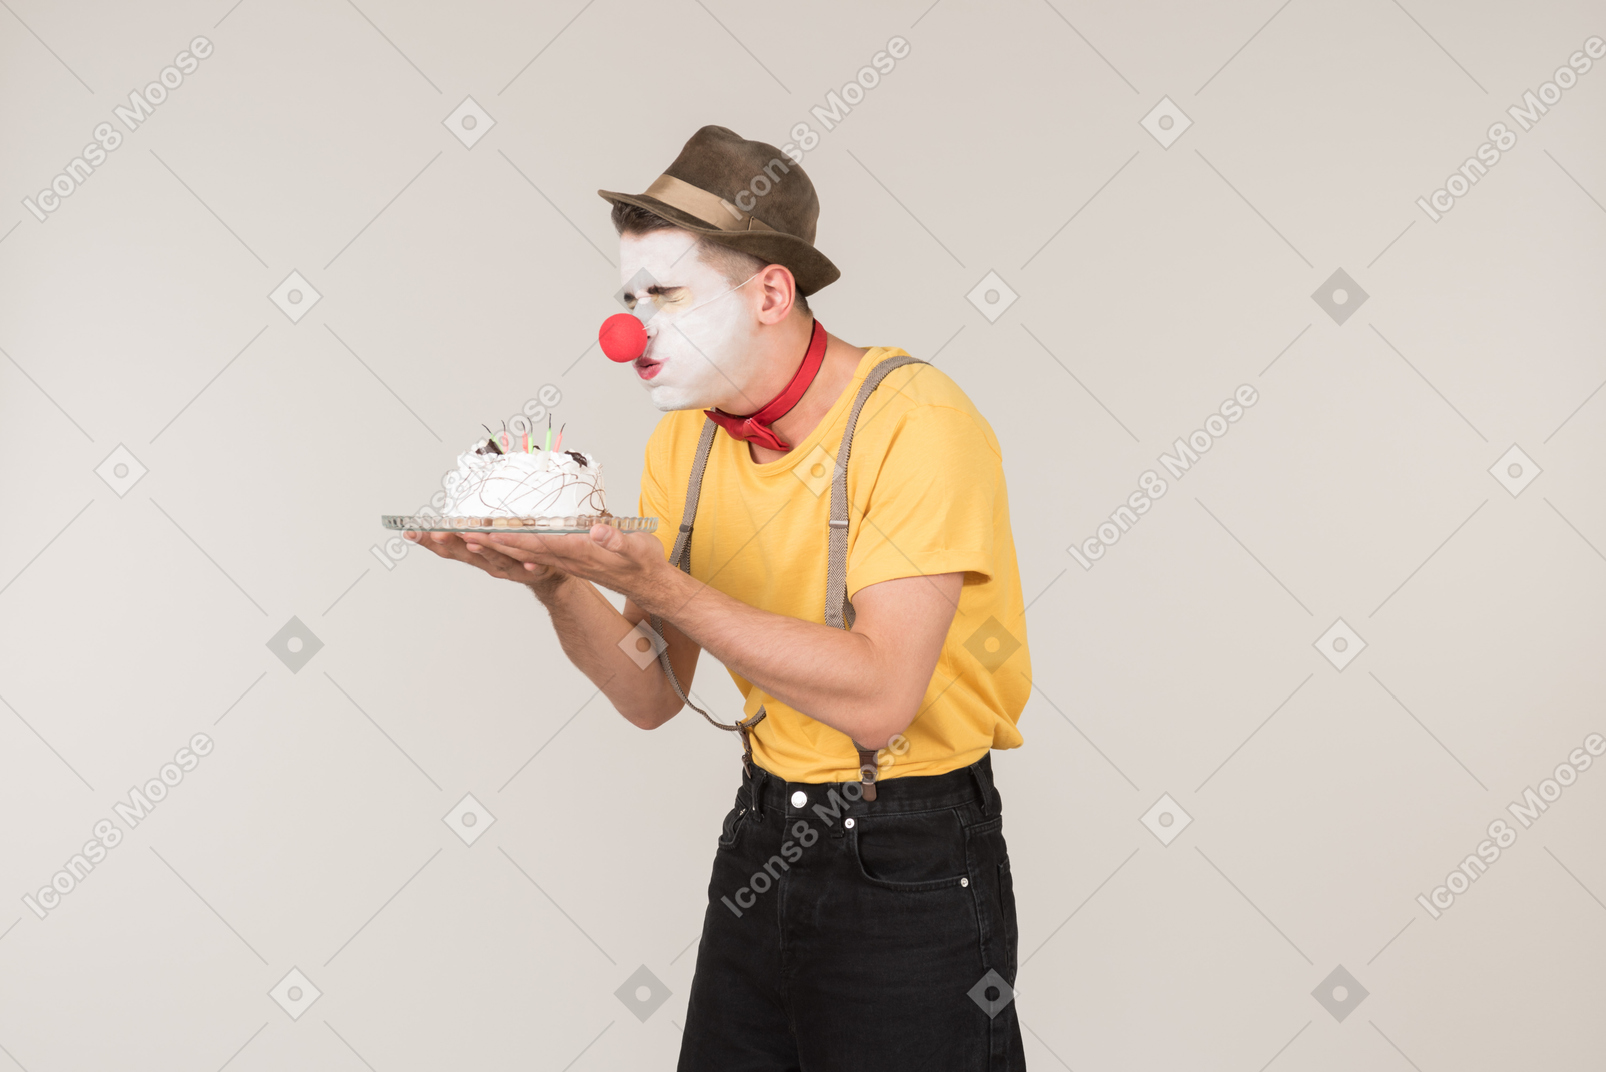 Male clown tasting a cake he's holding